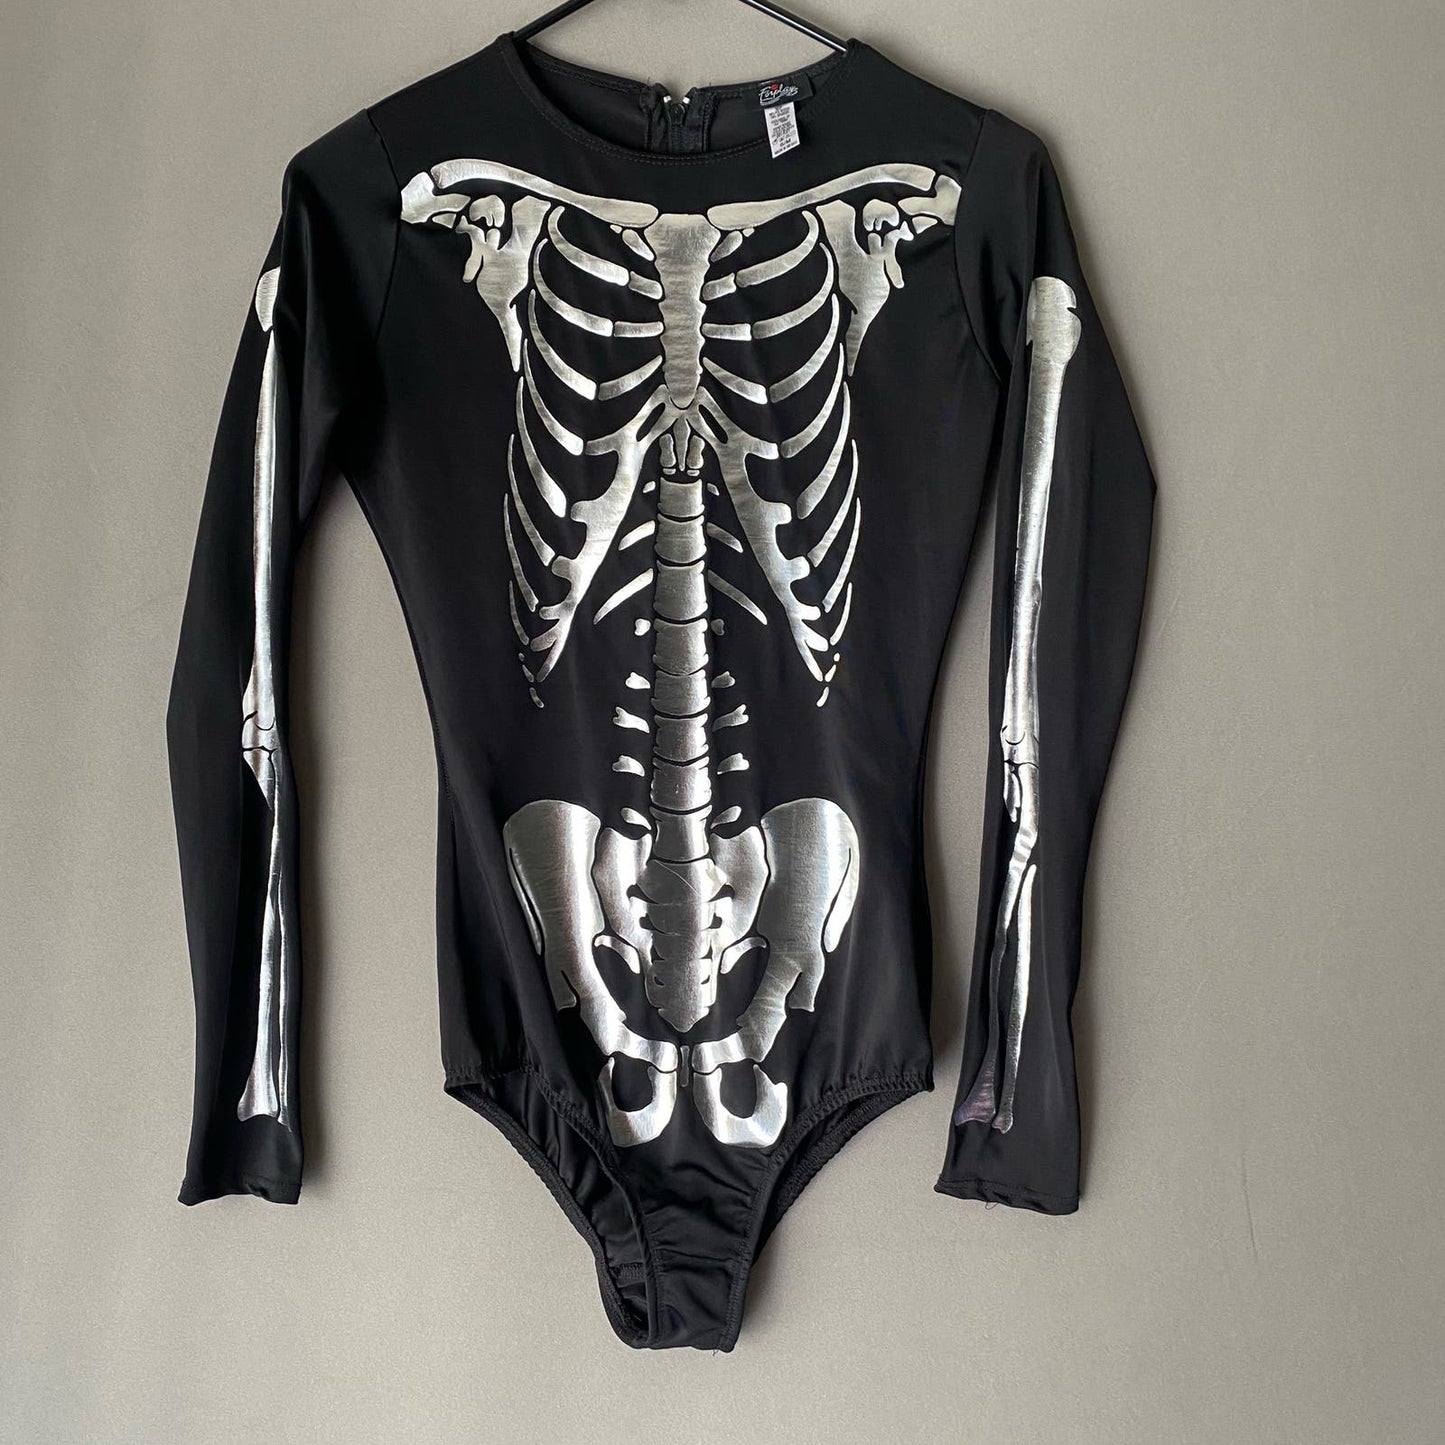 ForPlay sz S/M Skeleton bodysuit halloween day of the dead sexy costume